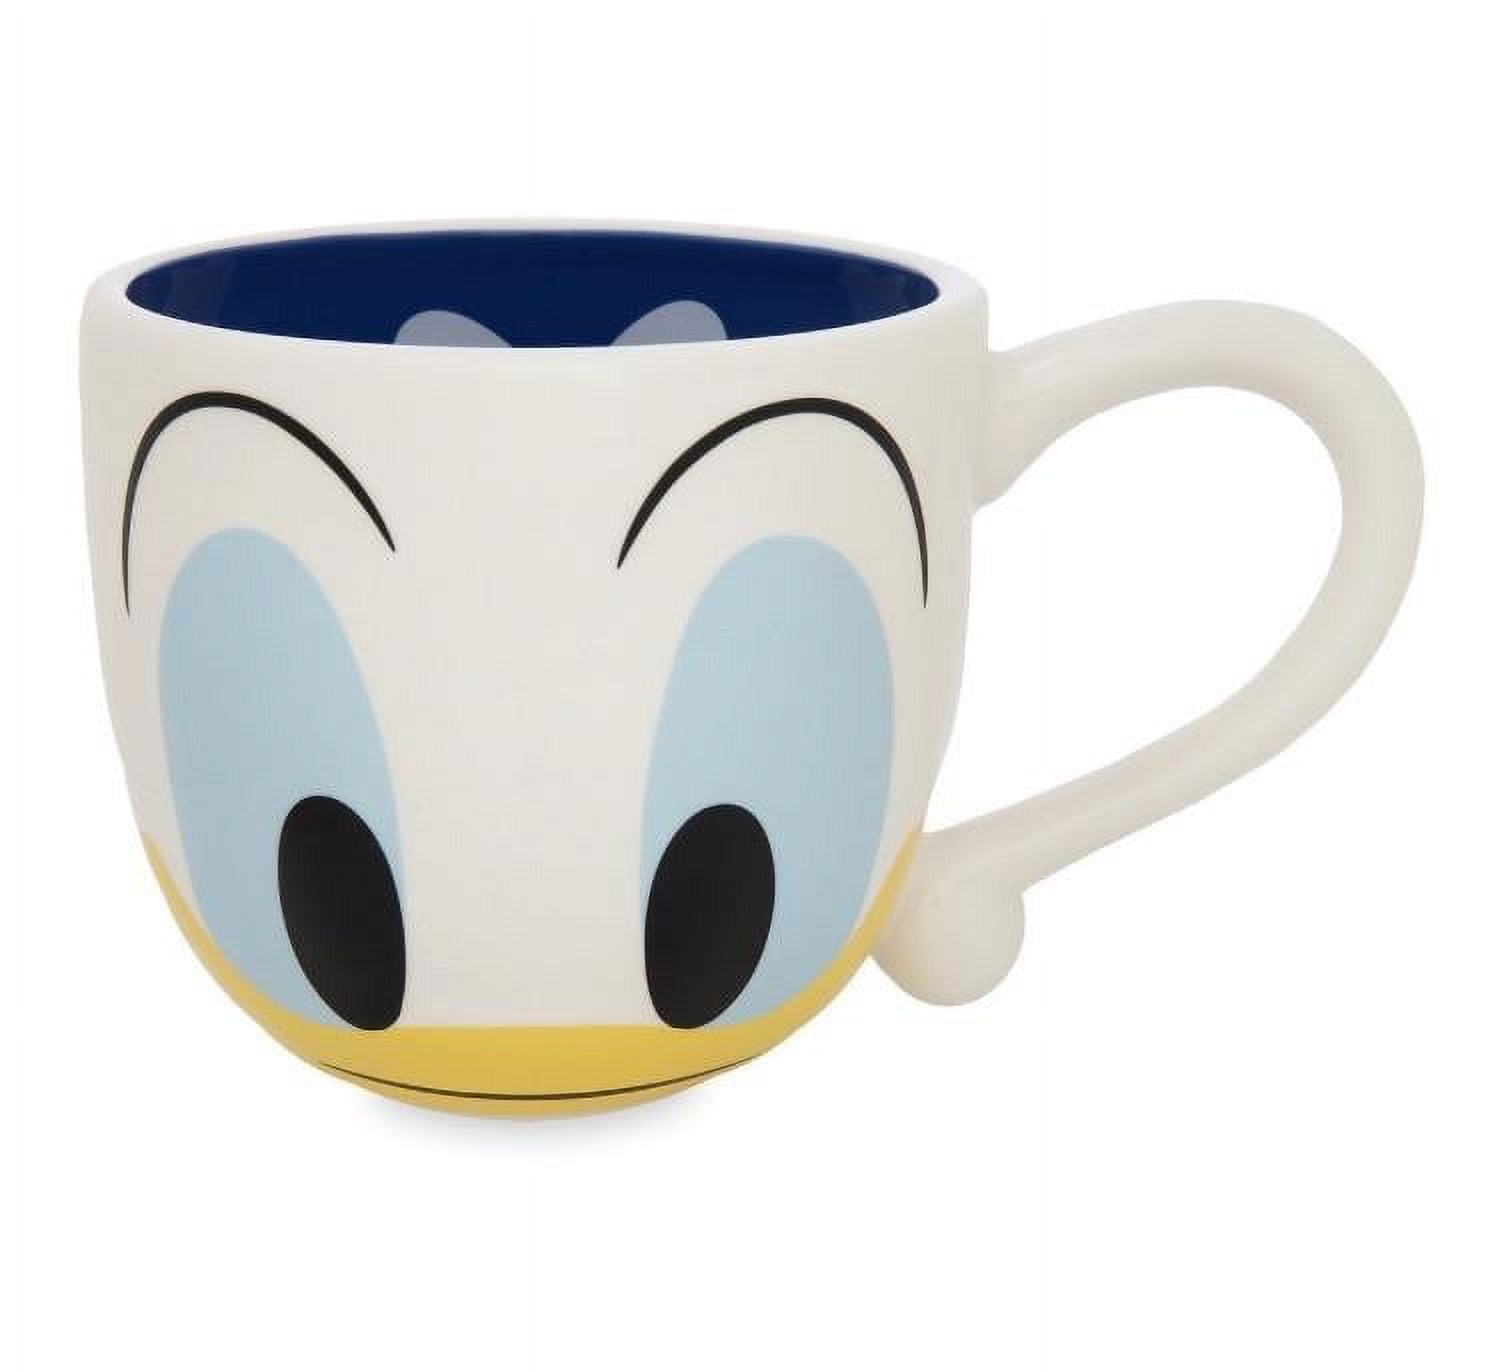 Donald Duck Glass Mug by Arribas – Large – Personalized